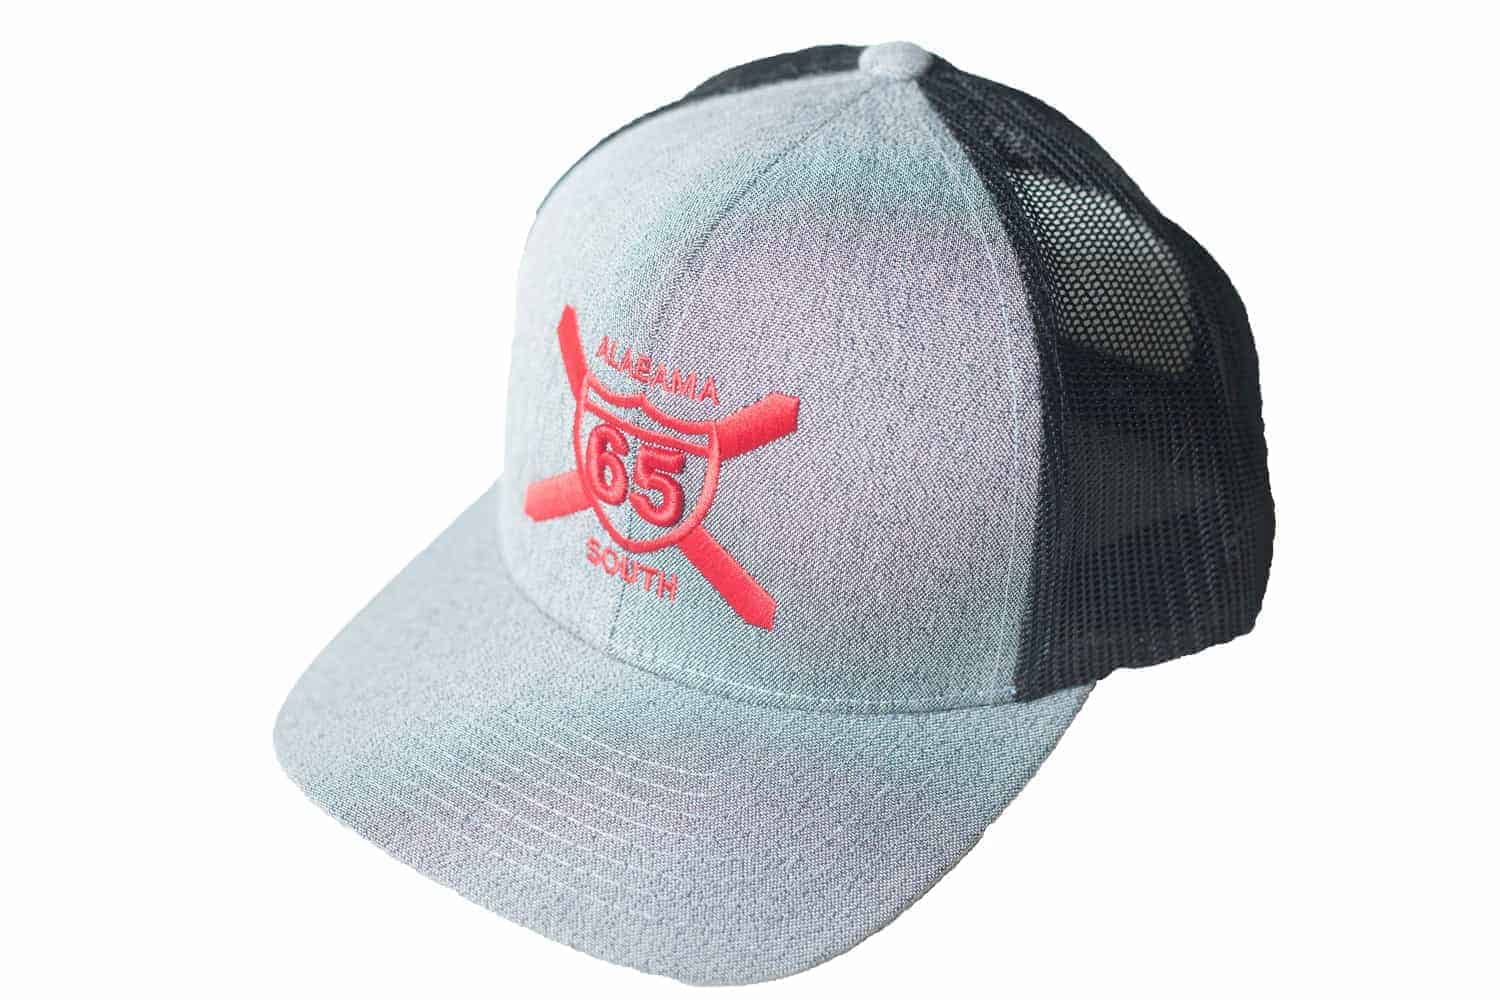 “65 South Artist Series Hat” The Muncaster - 65 South